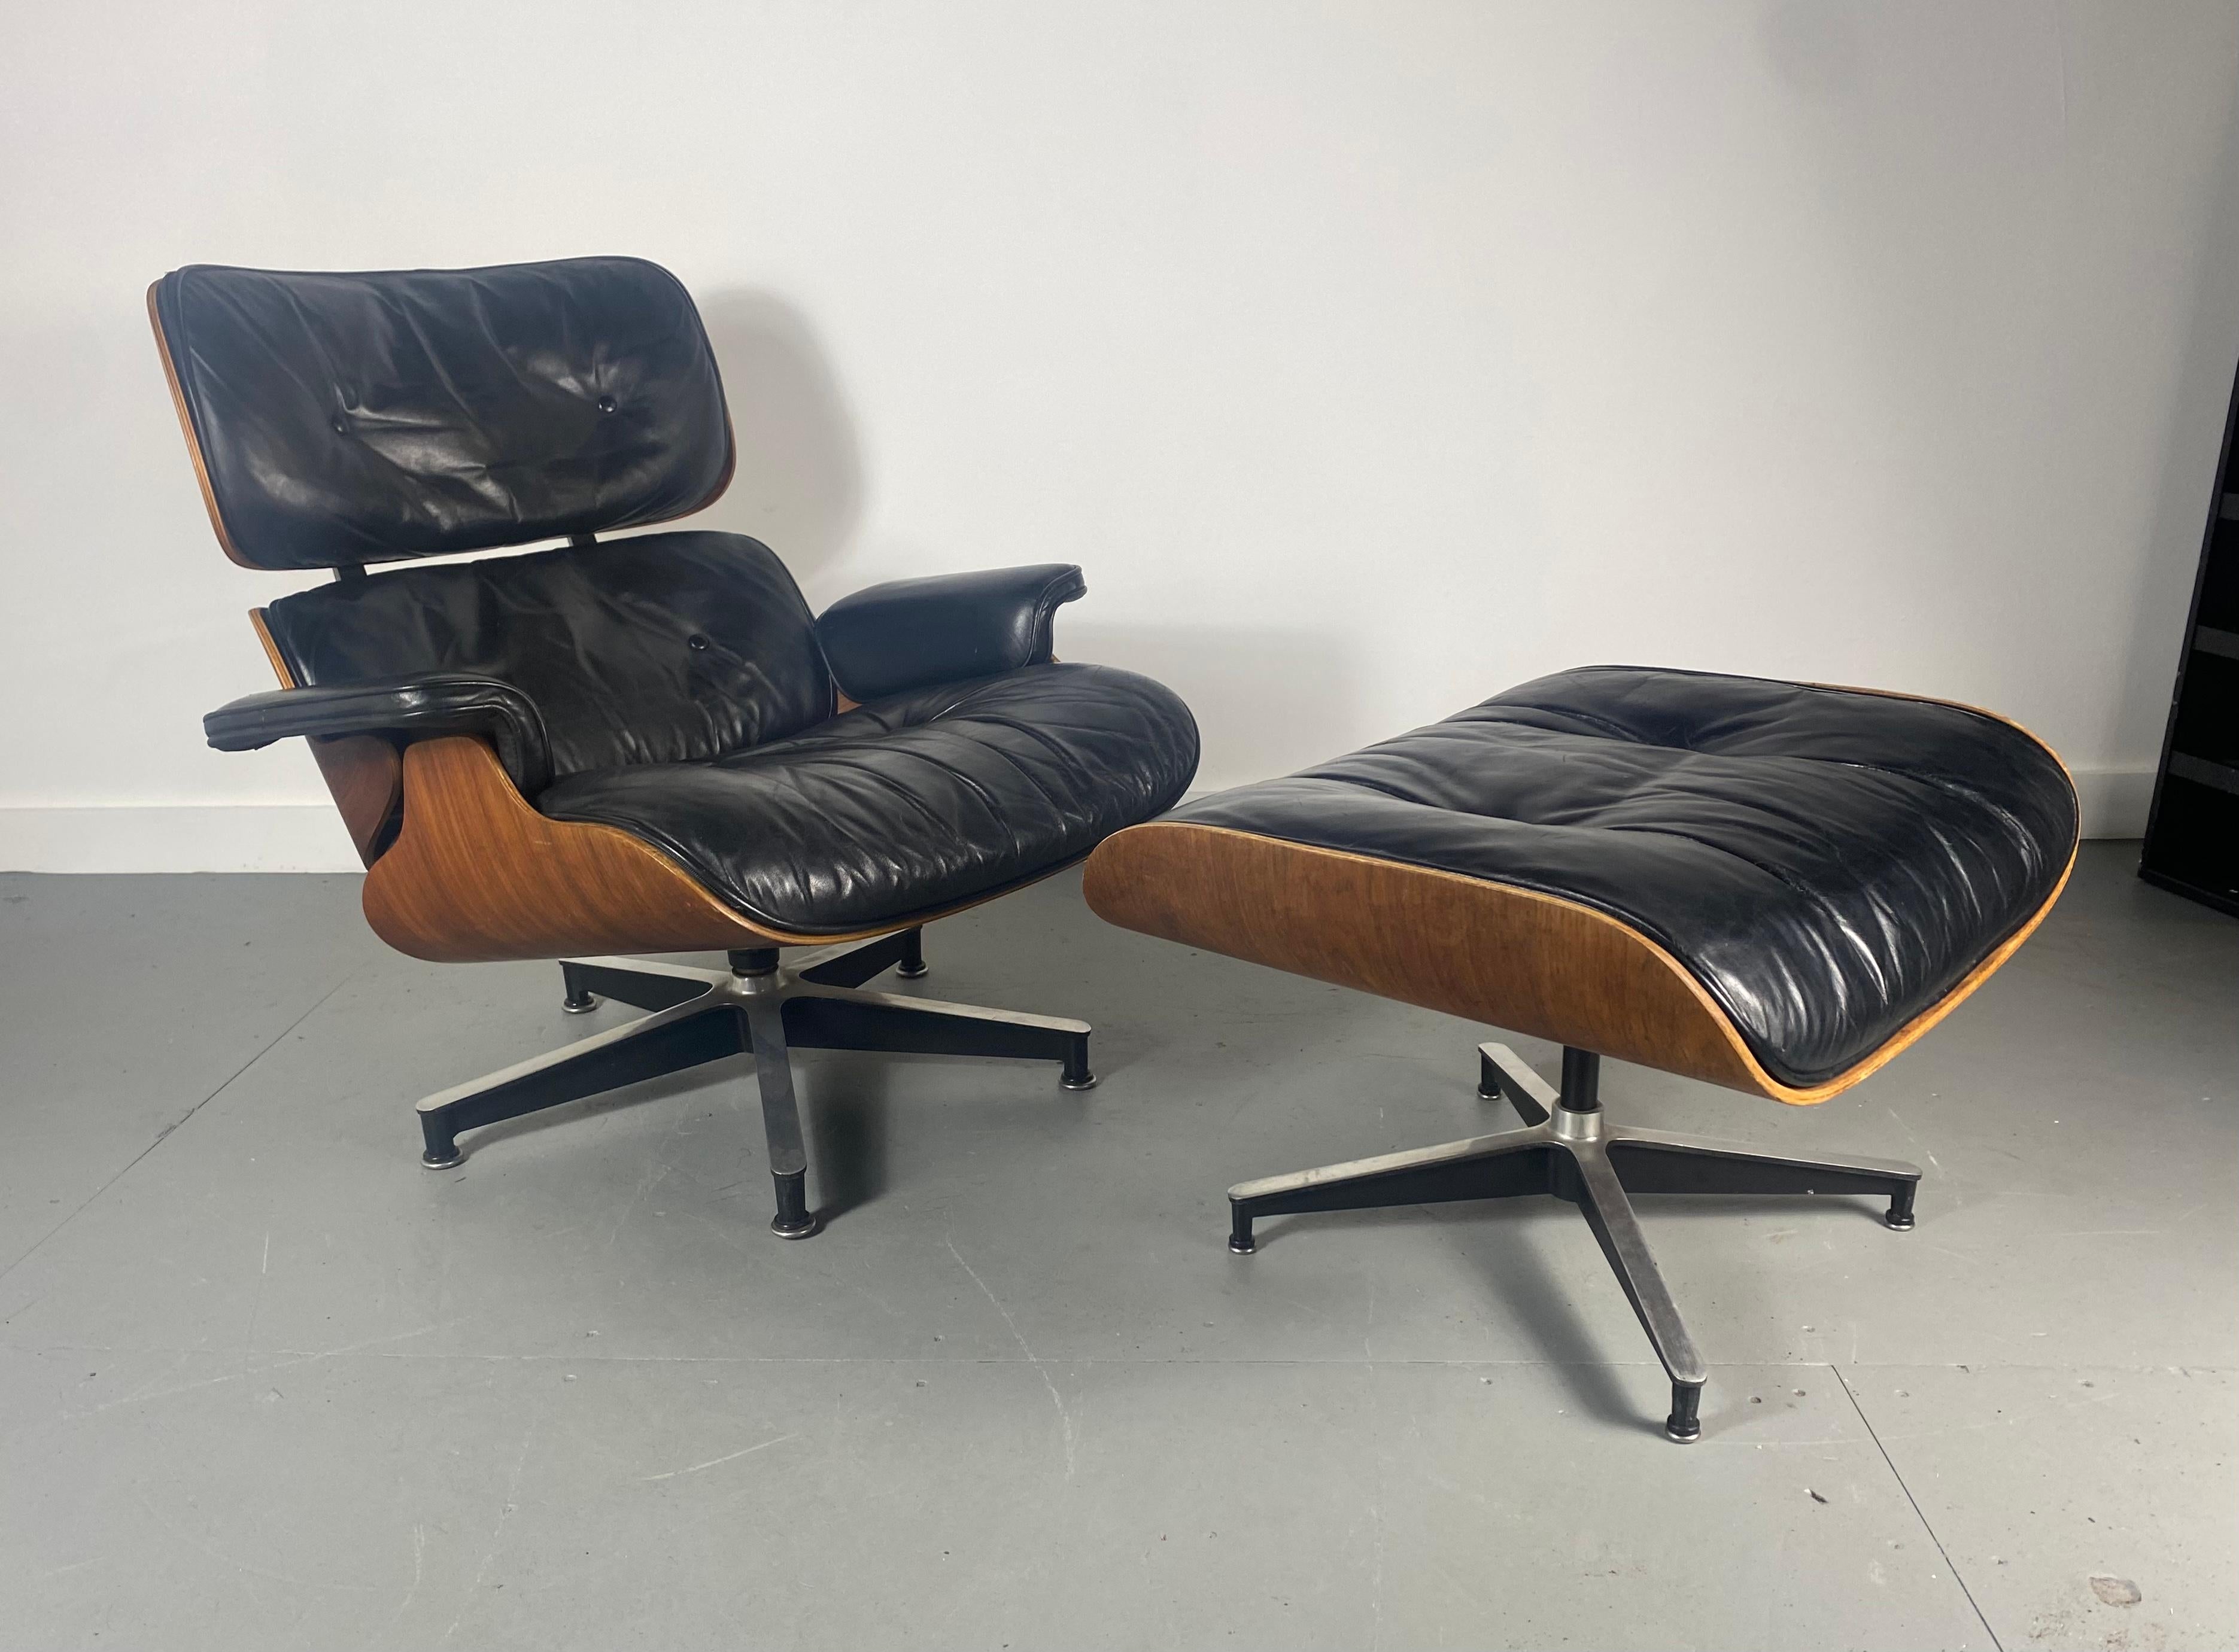 Beautiful vintage Brazilian rosewood and leather Eames lounge chair and ottoman by Herman Miller. 3rd Generation, mid to late 1960s. This is an excellent, unmolested example. The original leather upholstery is perfectly broken in, wonderful supple